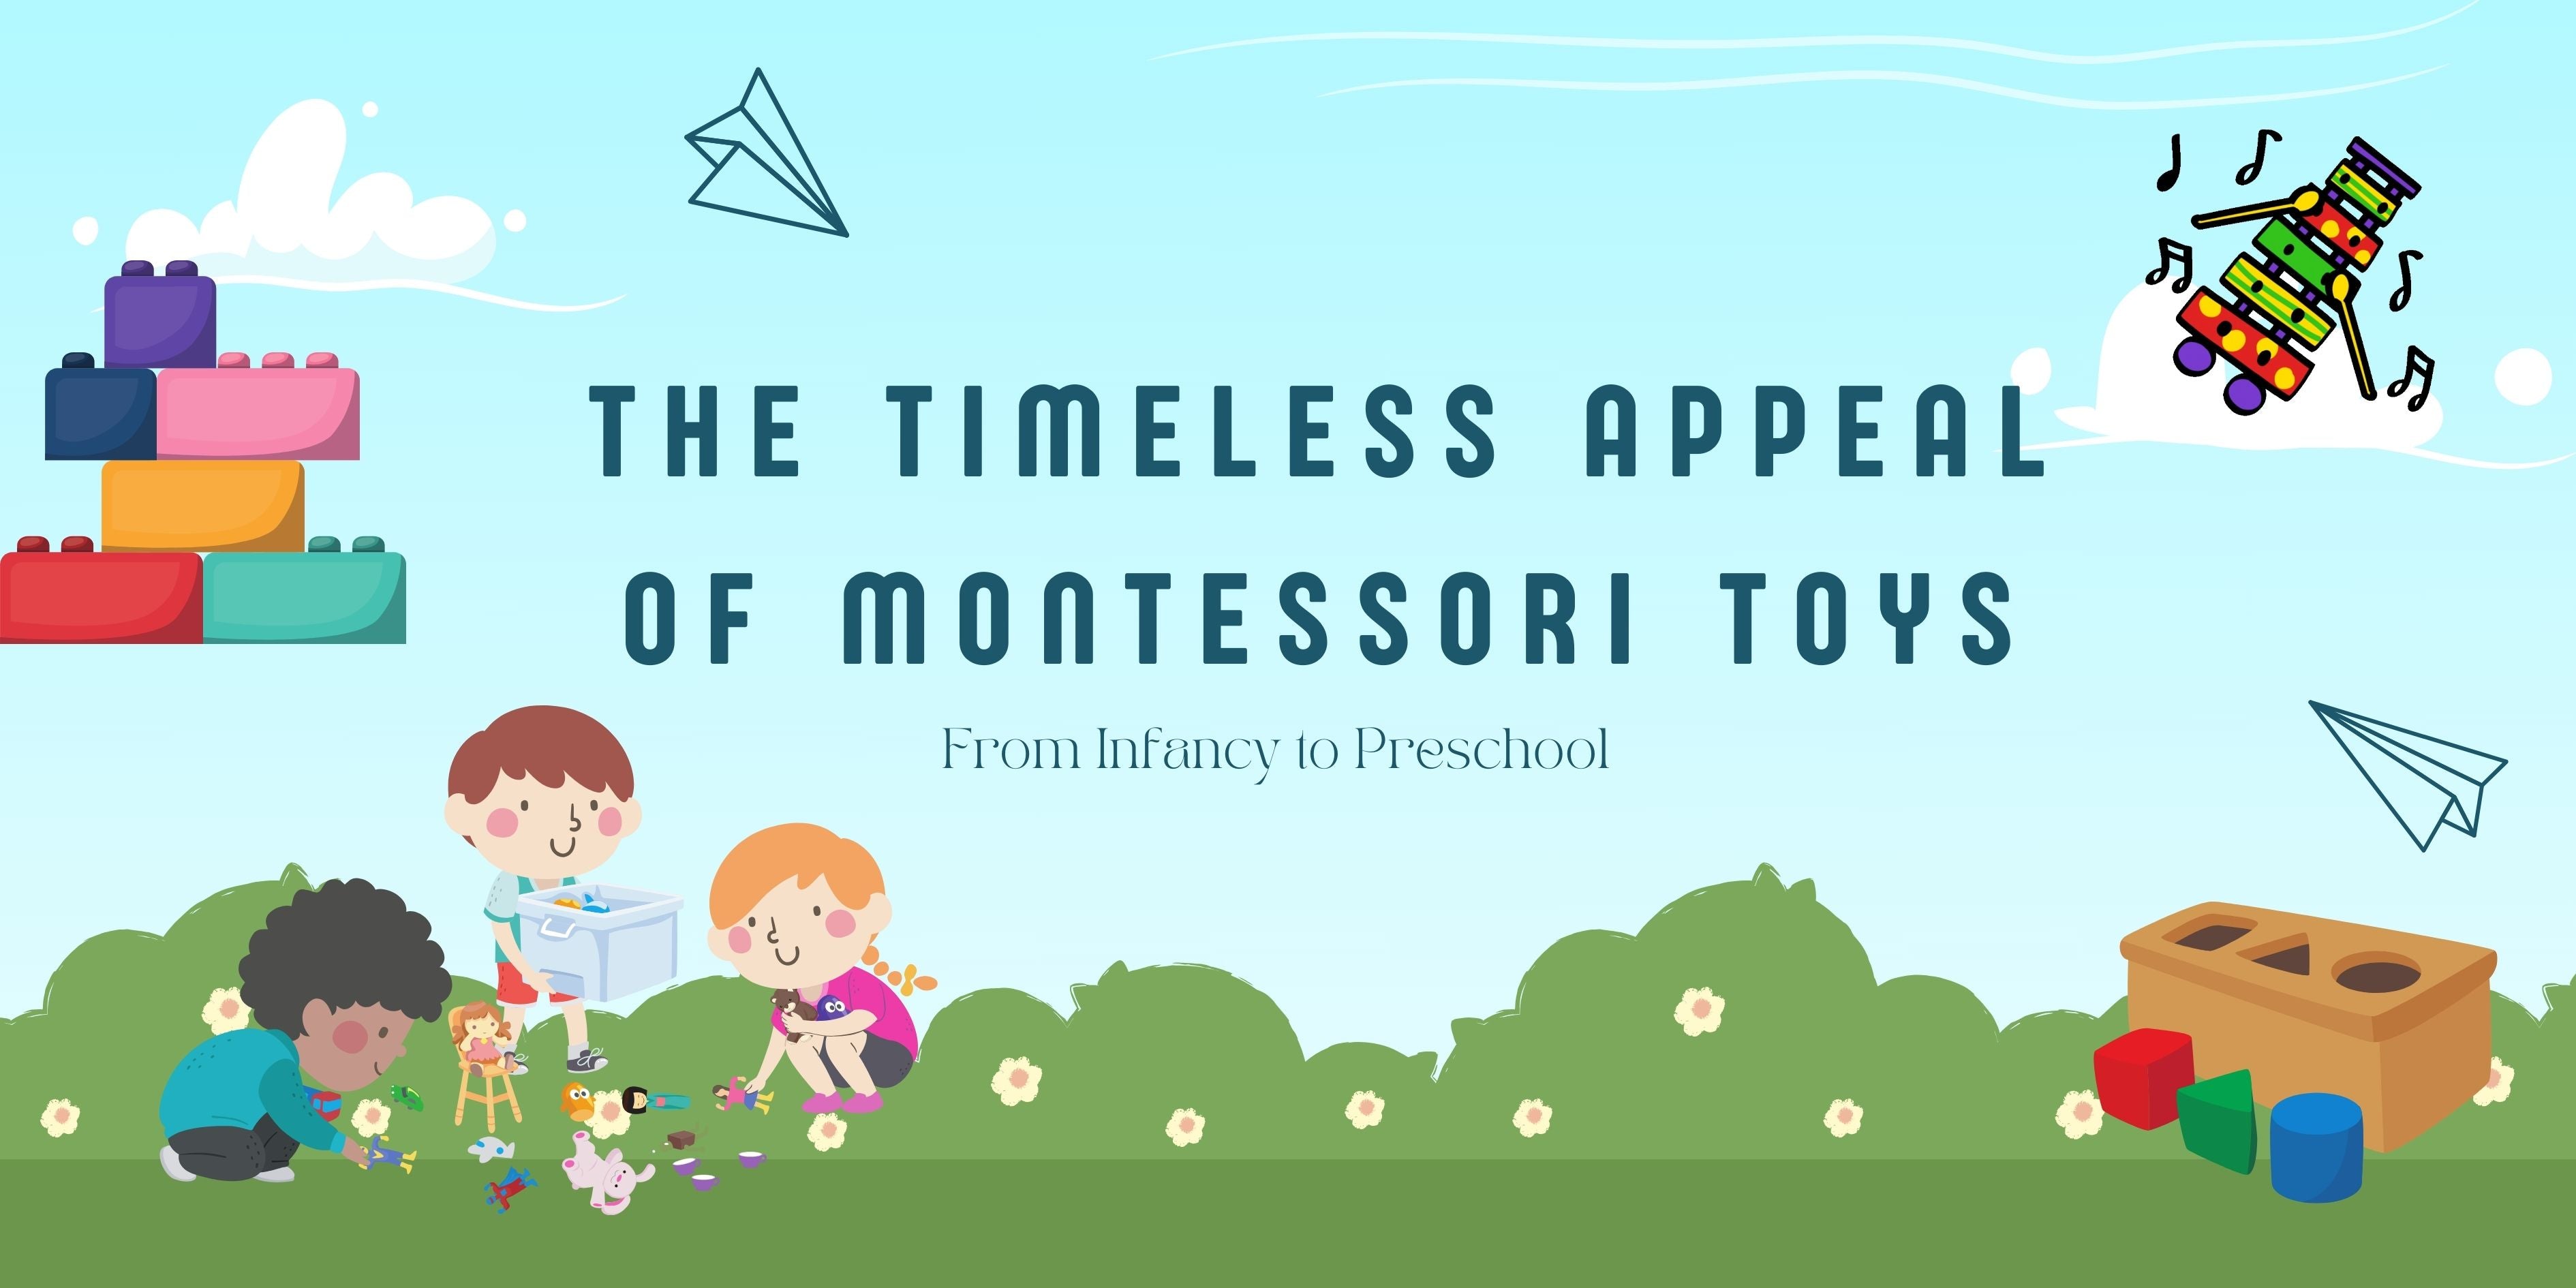 From Infancy to Preschool: The Timeless Appeal of Montessori Toys